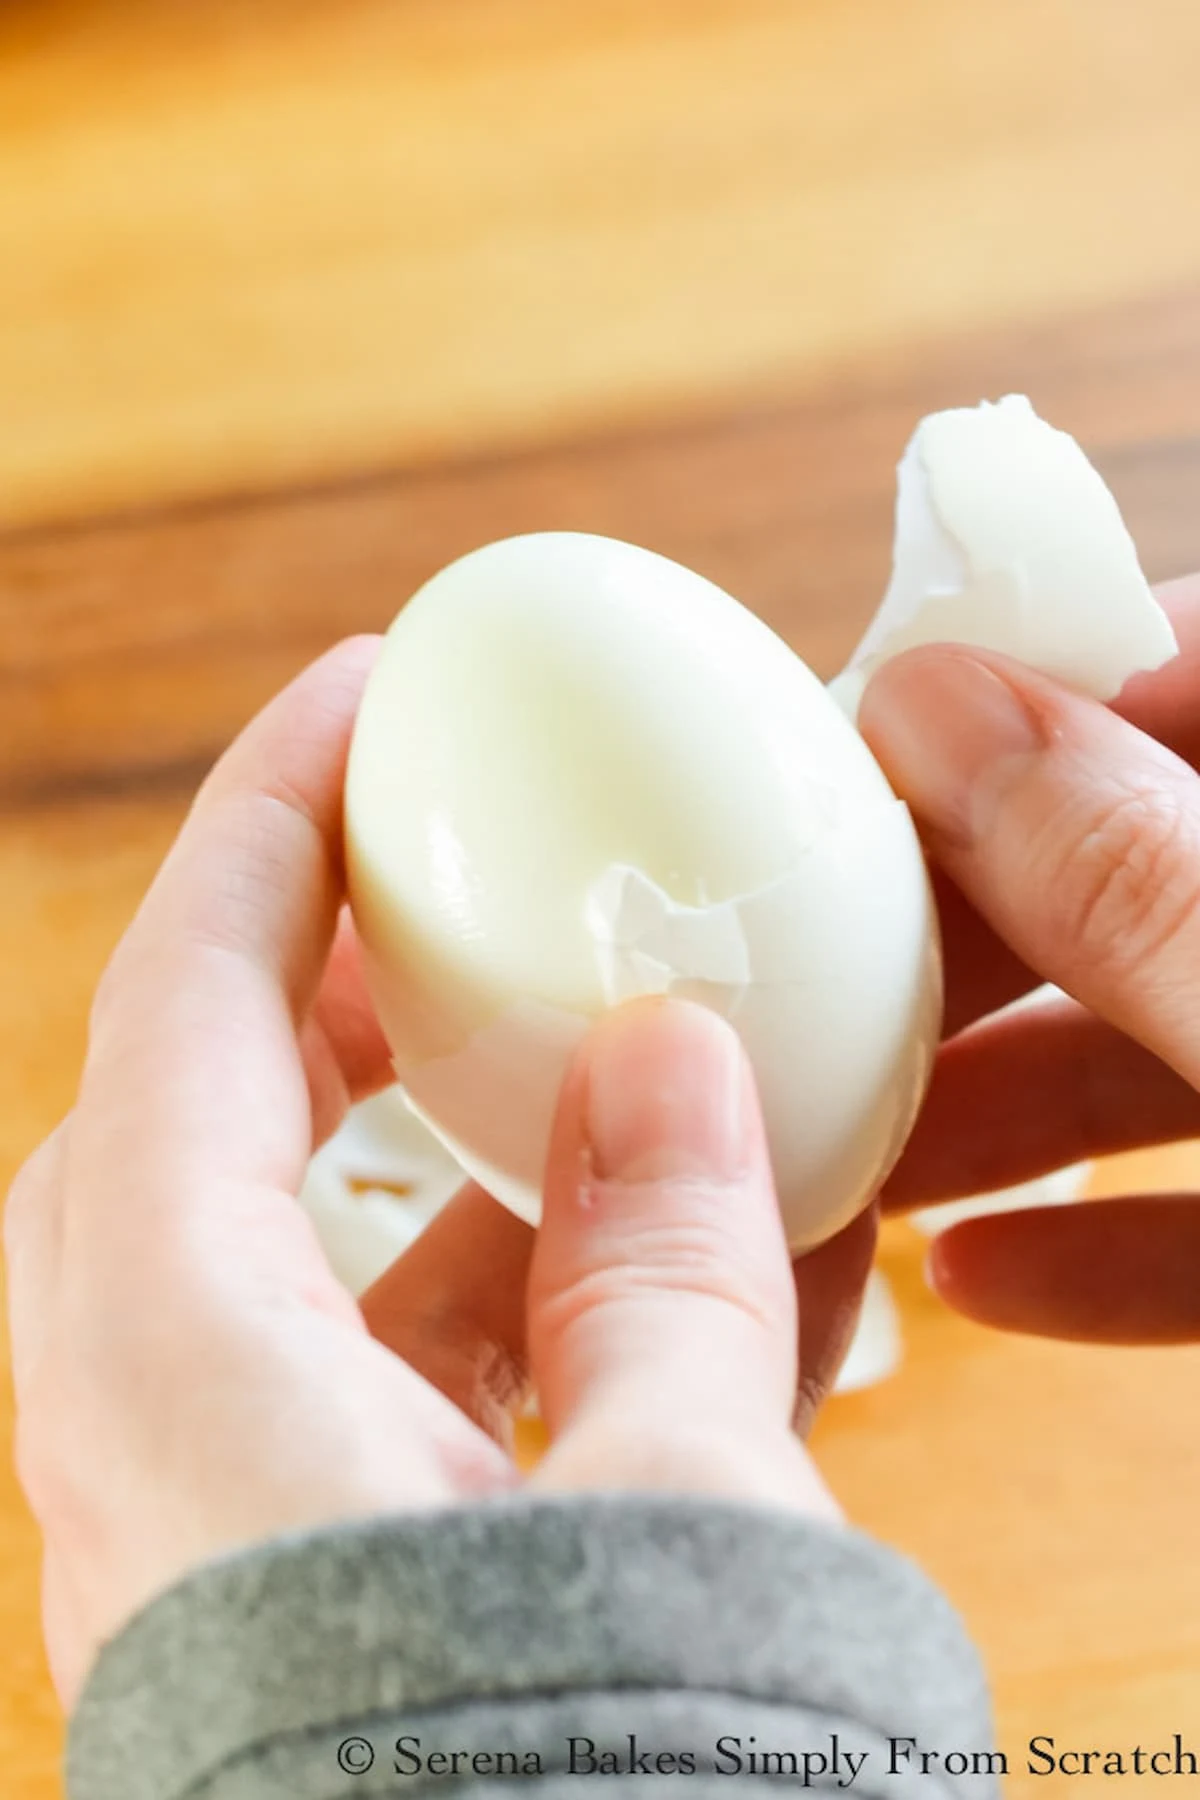 The shell easily peeling off a perfect hard boiled egg.